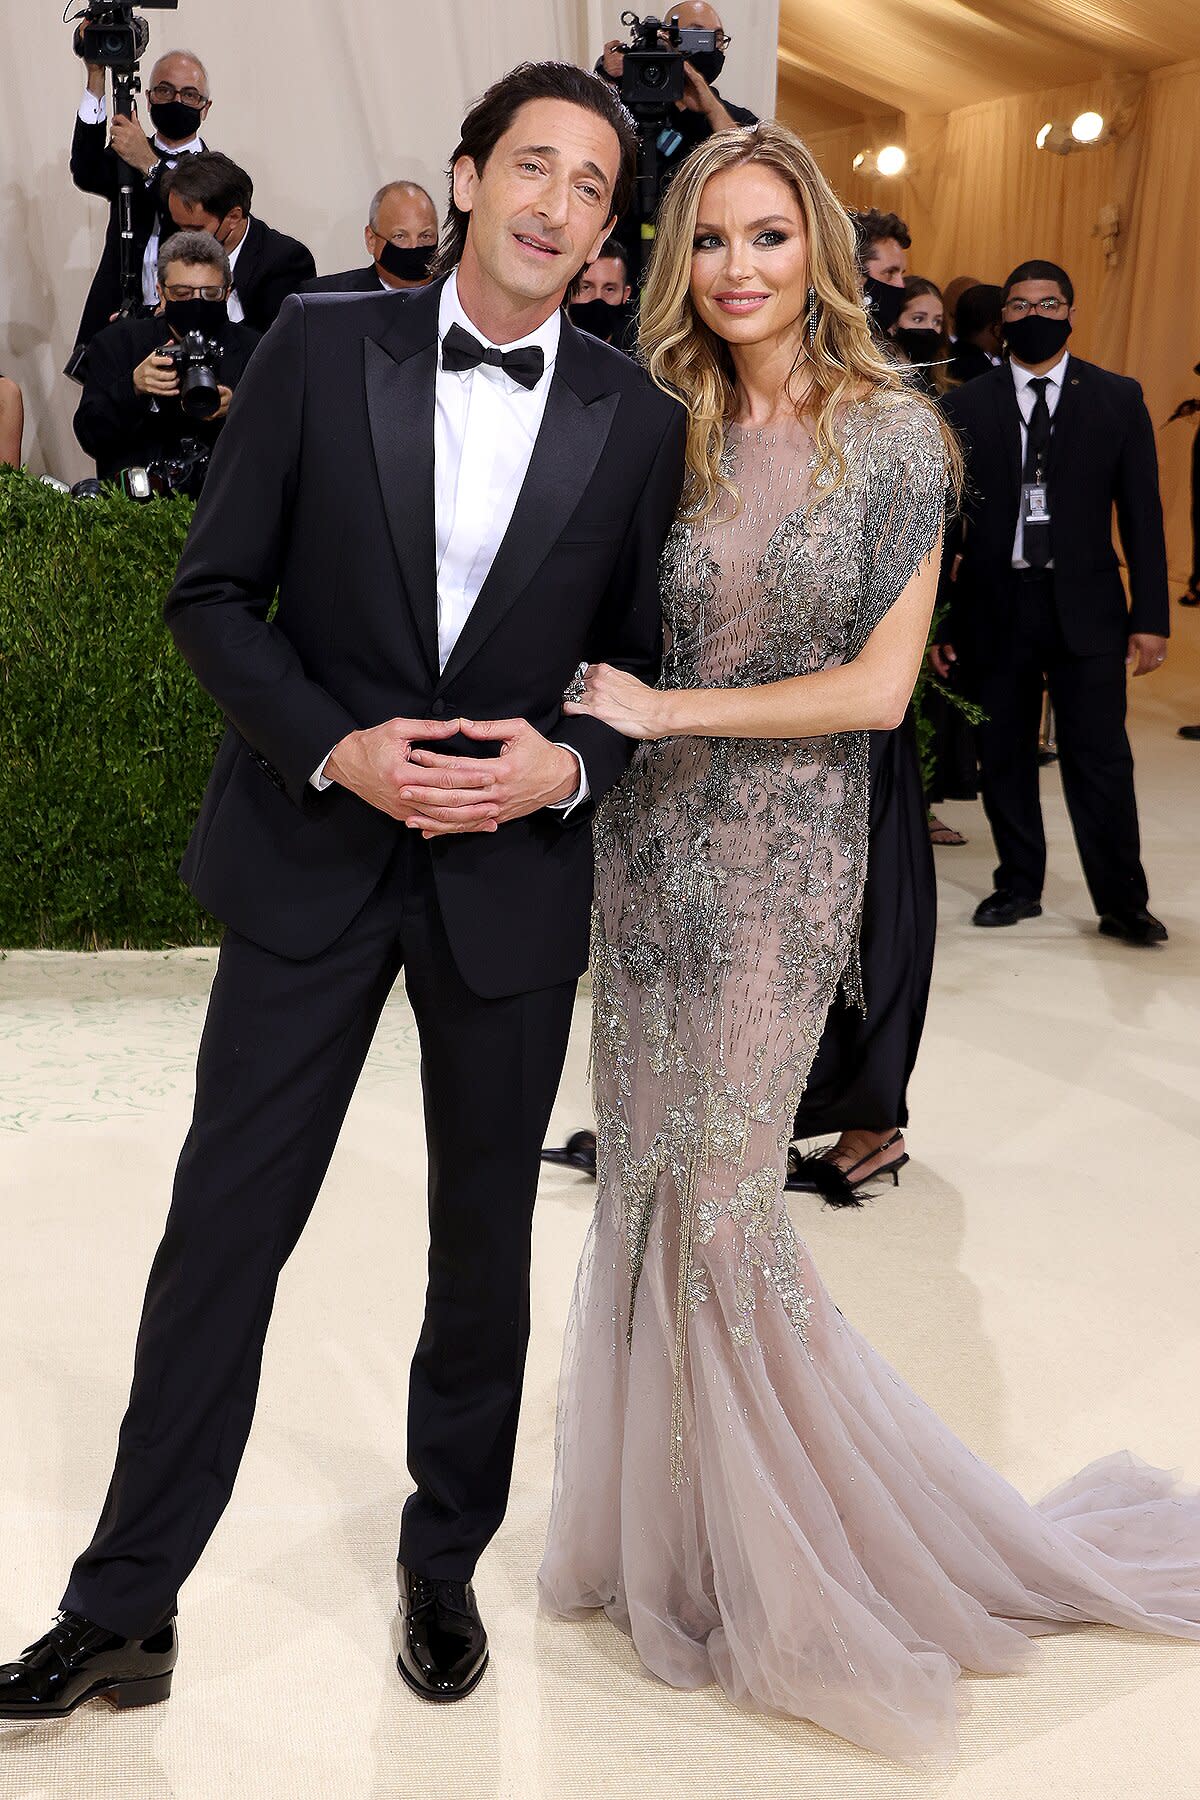 Adrien Brody and Georgina Chapman attend The 2021 Met Gala Celebrating In America: A Lexicon Of Fashion at Metropolitan Museum of Art on September 13, 2021 in New York City.